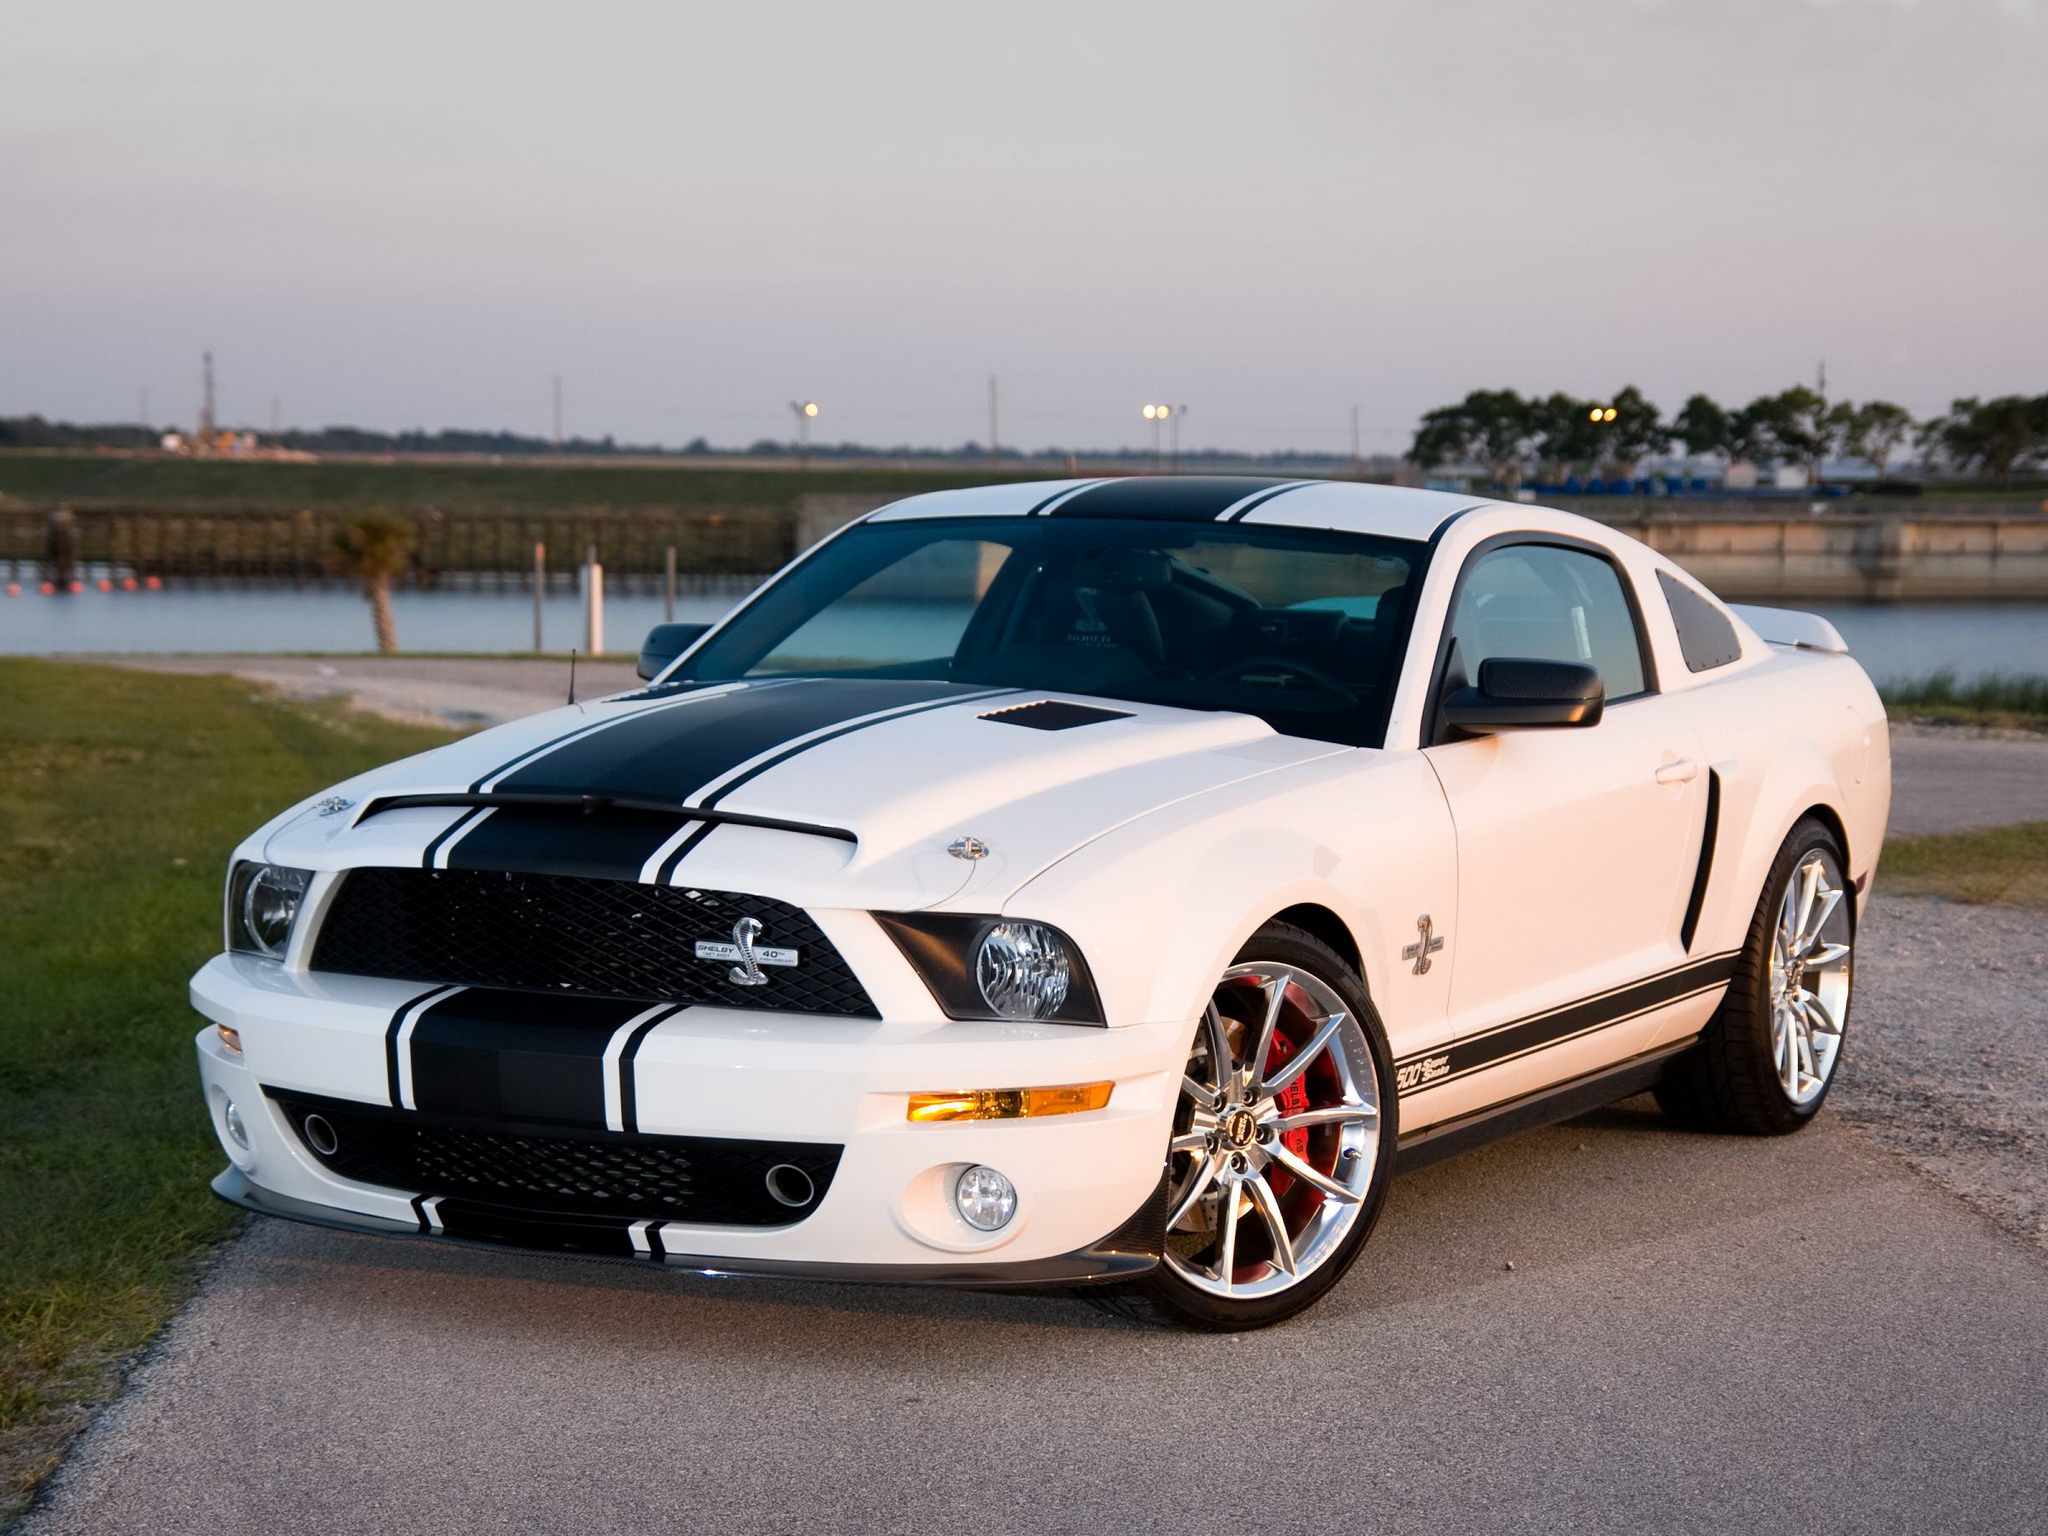 Shelby Gt500 Super Snake Muscle Ford Mustang G Wallpaper